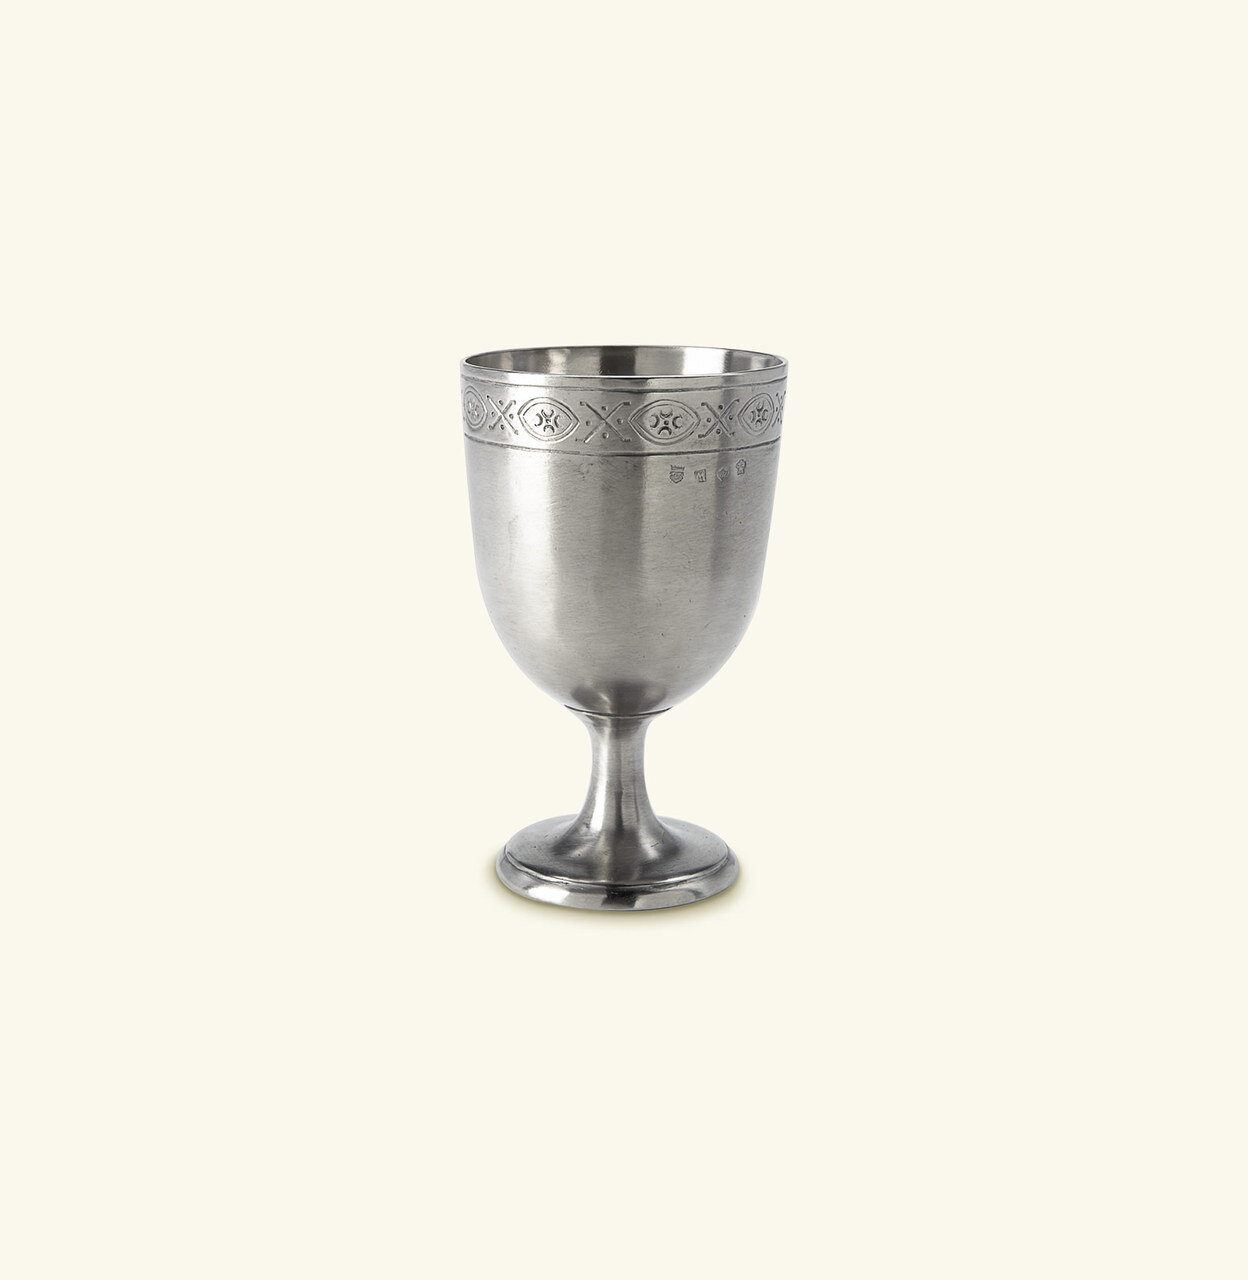 Match Pewter Engraved Chalice Large a774.0